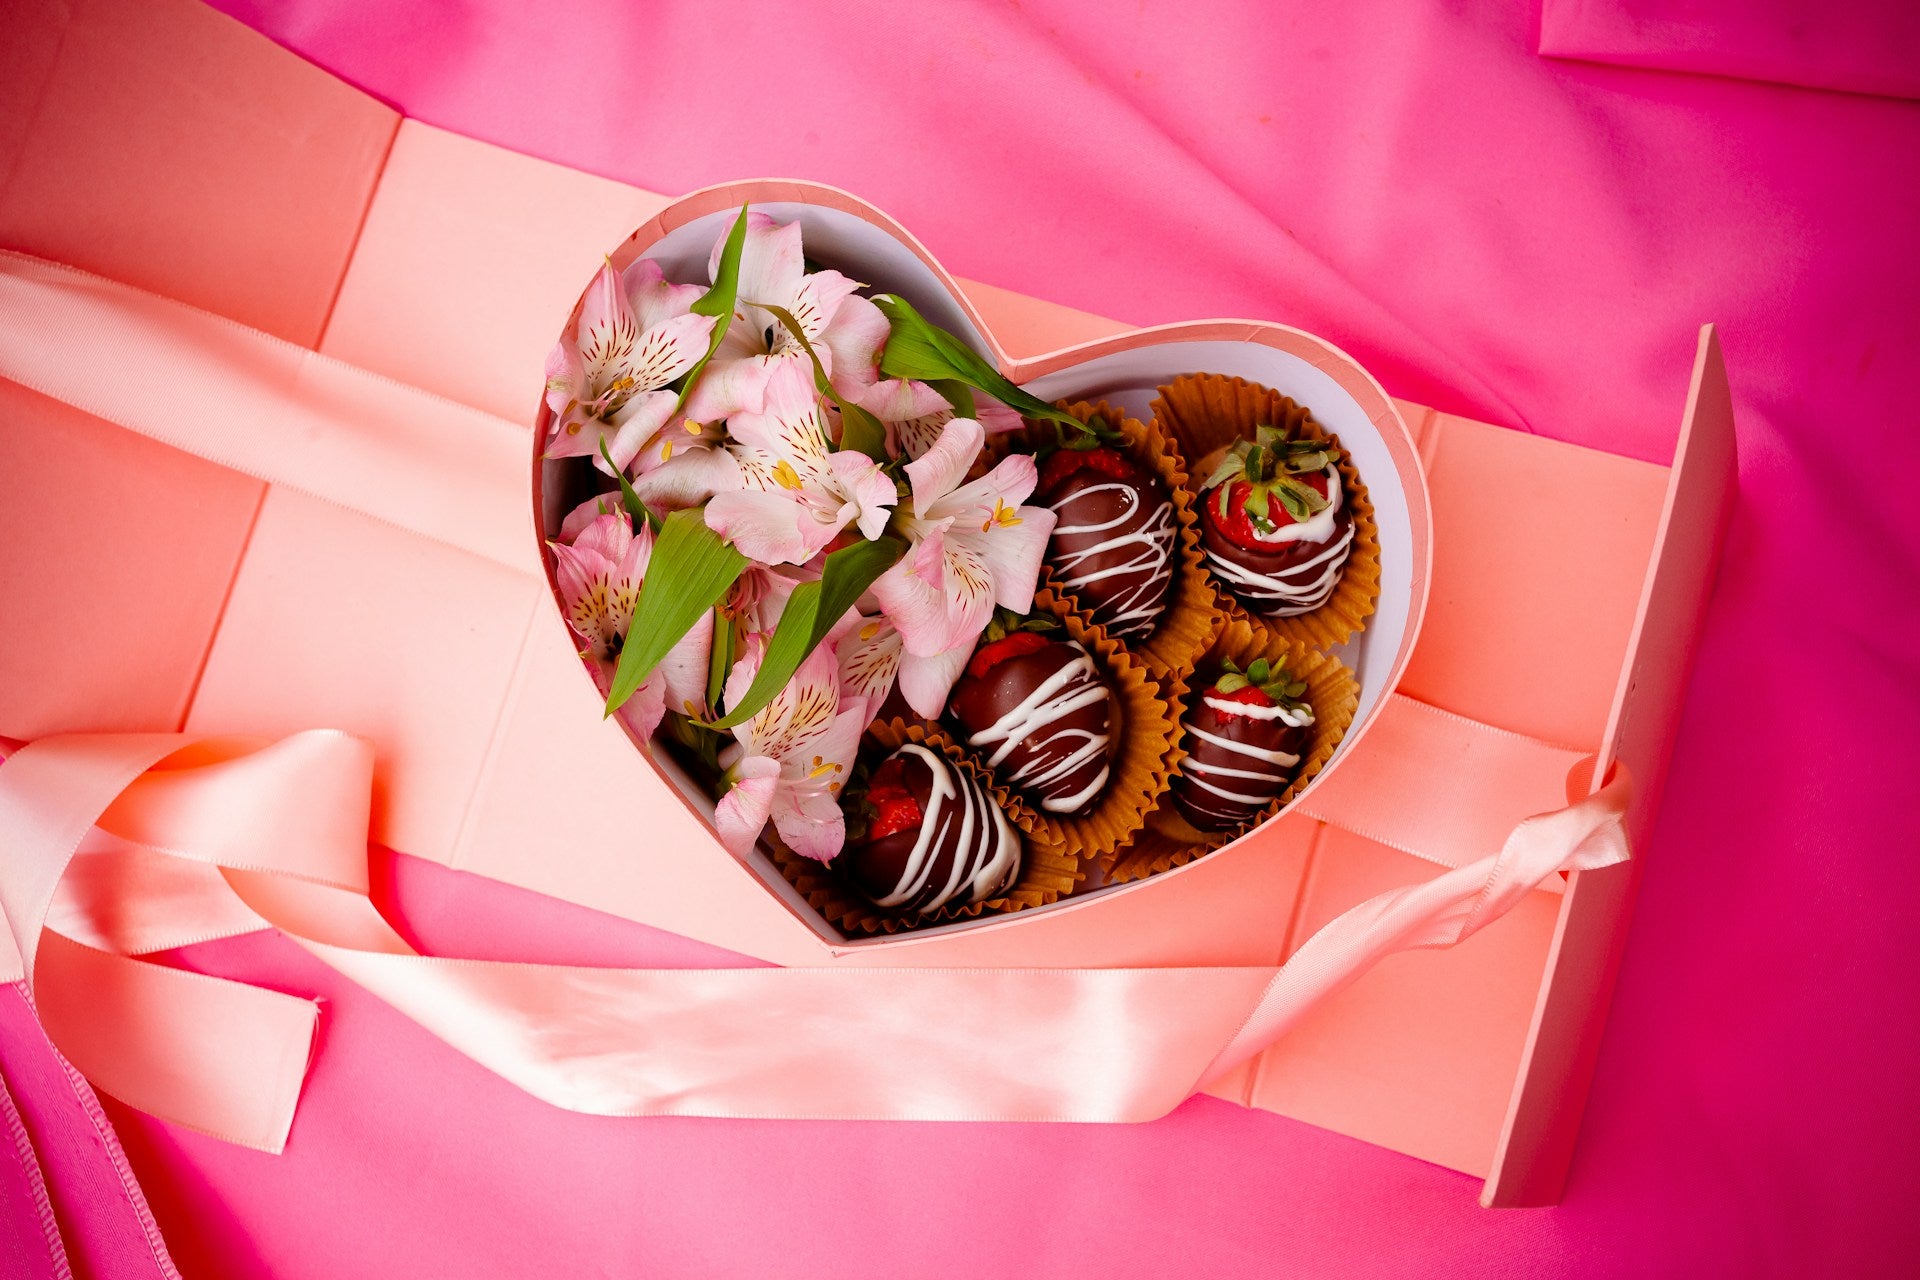 A heart-shaped box of chocolate covered strawberries and pink flowers.